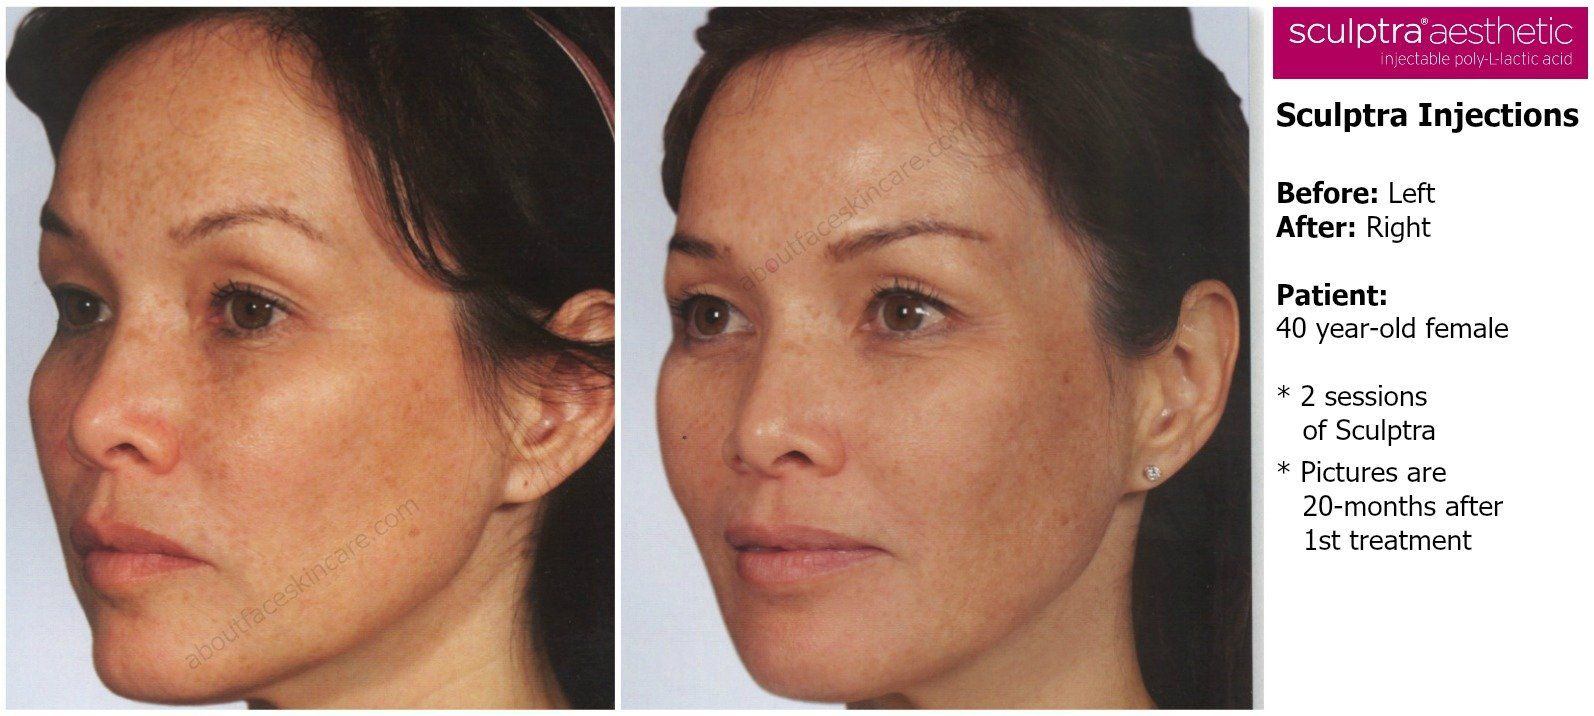 Cocktail facial injections plastic injections